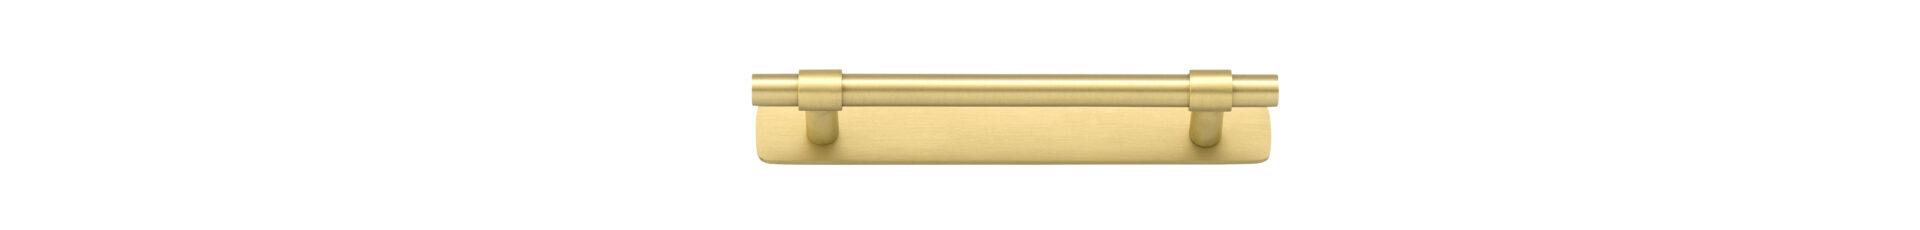 17152B - Helsinki Cabinet Pull with Backplate- CTC128mm - Brushed Gold PVD